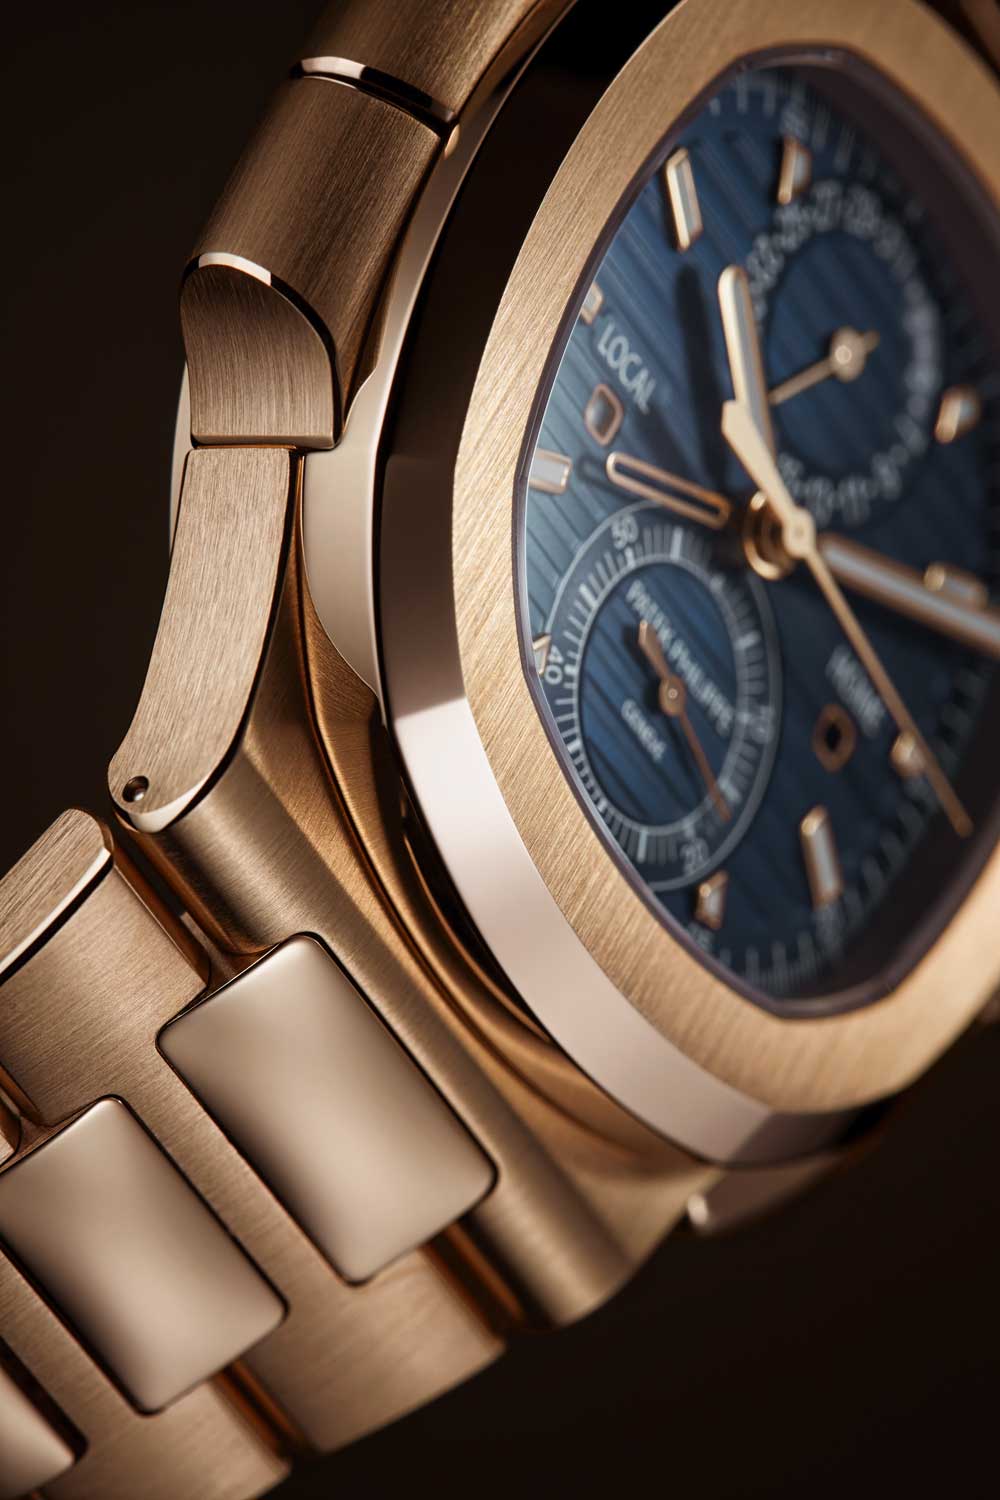 Patek Philippe Nautilus Travel Time Chronograph Ref. 5990/1R-001: a new look in rose gold with a blue sunburst dial